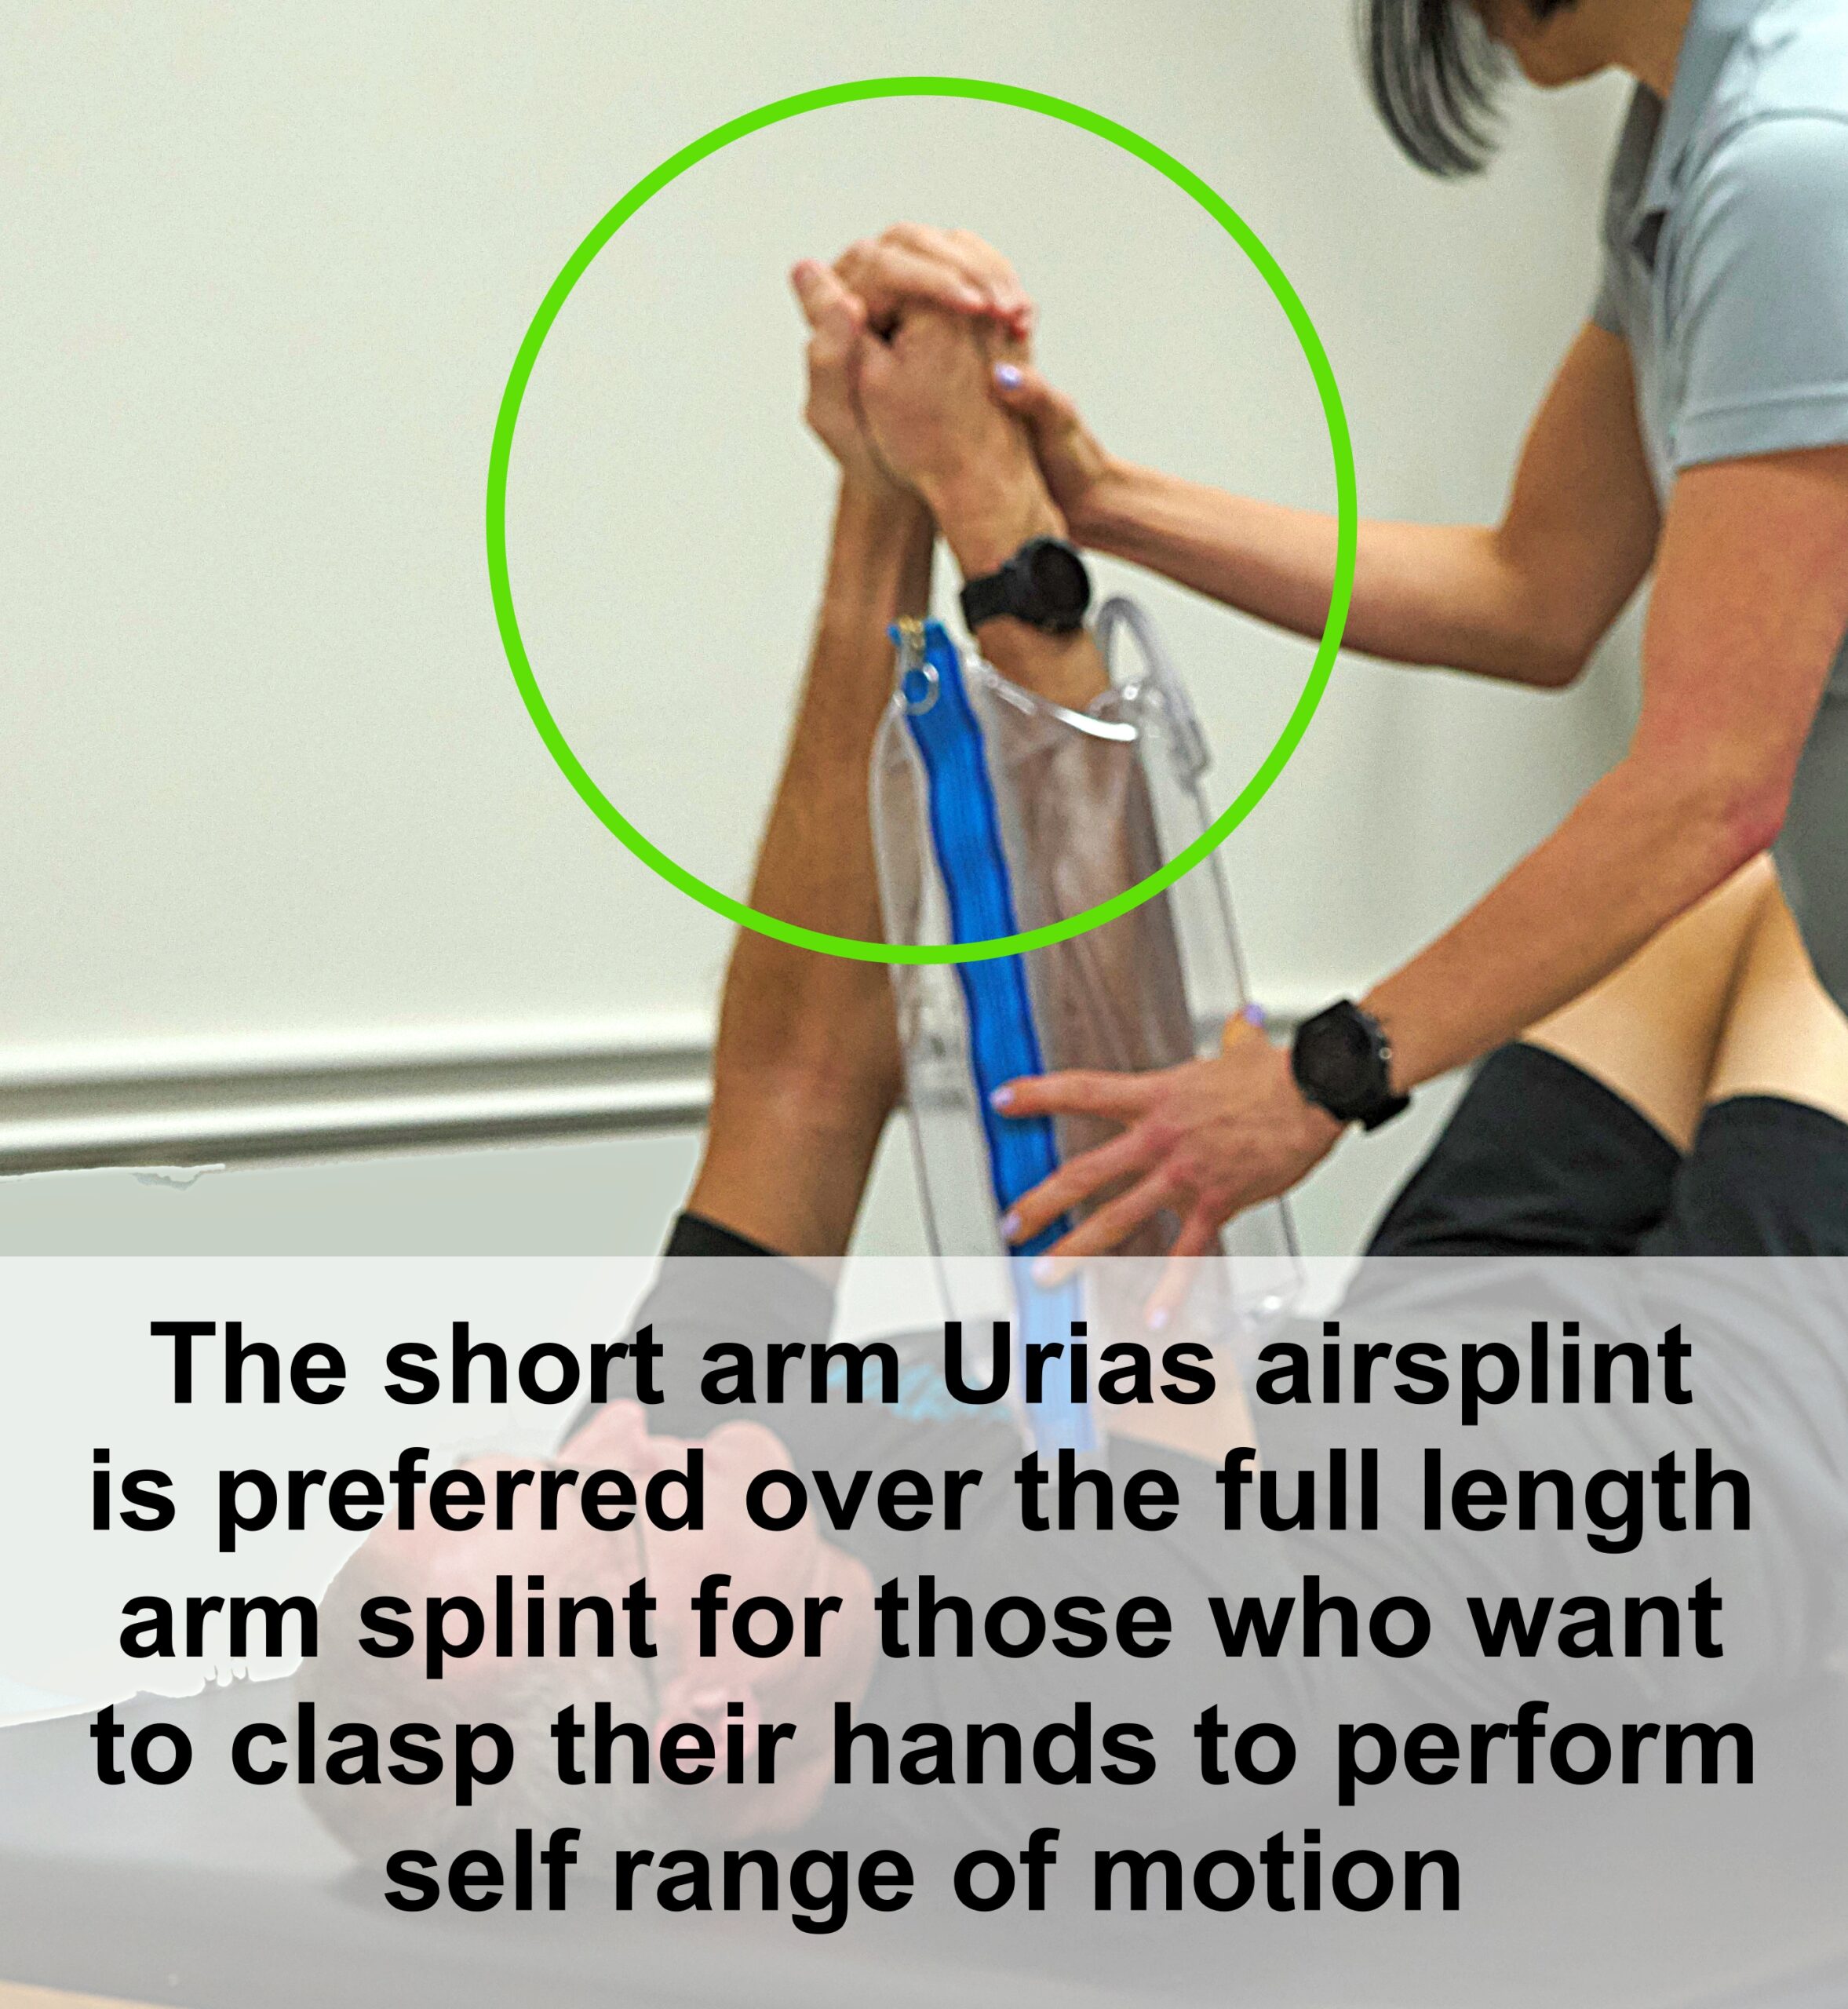 patient performing self range of motion with the urias air splint